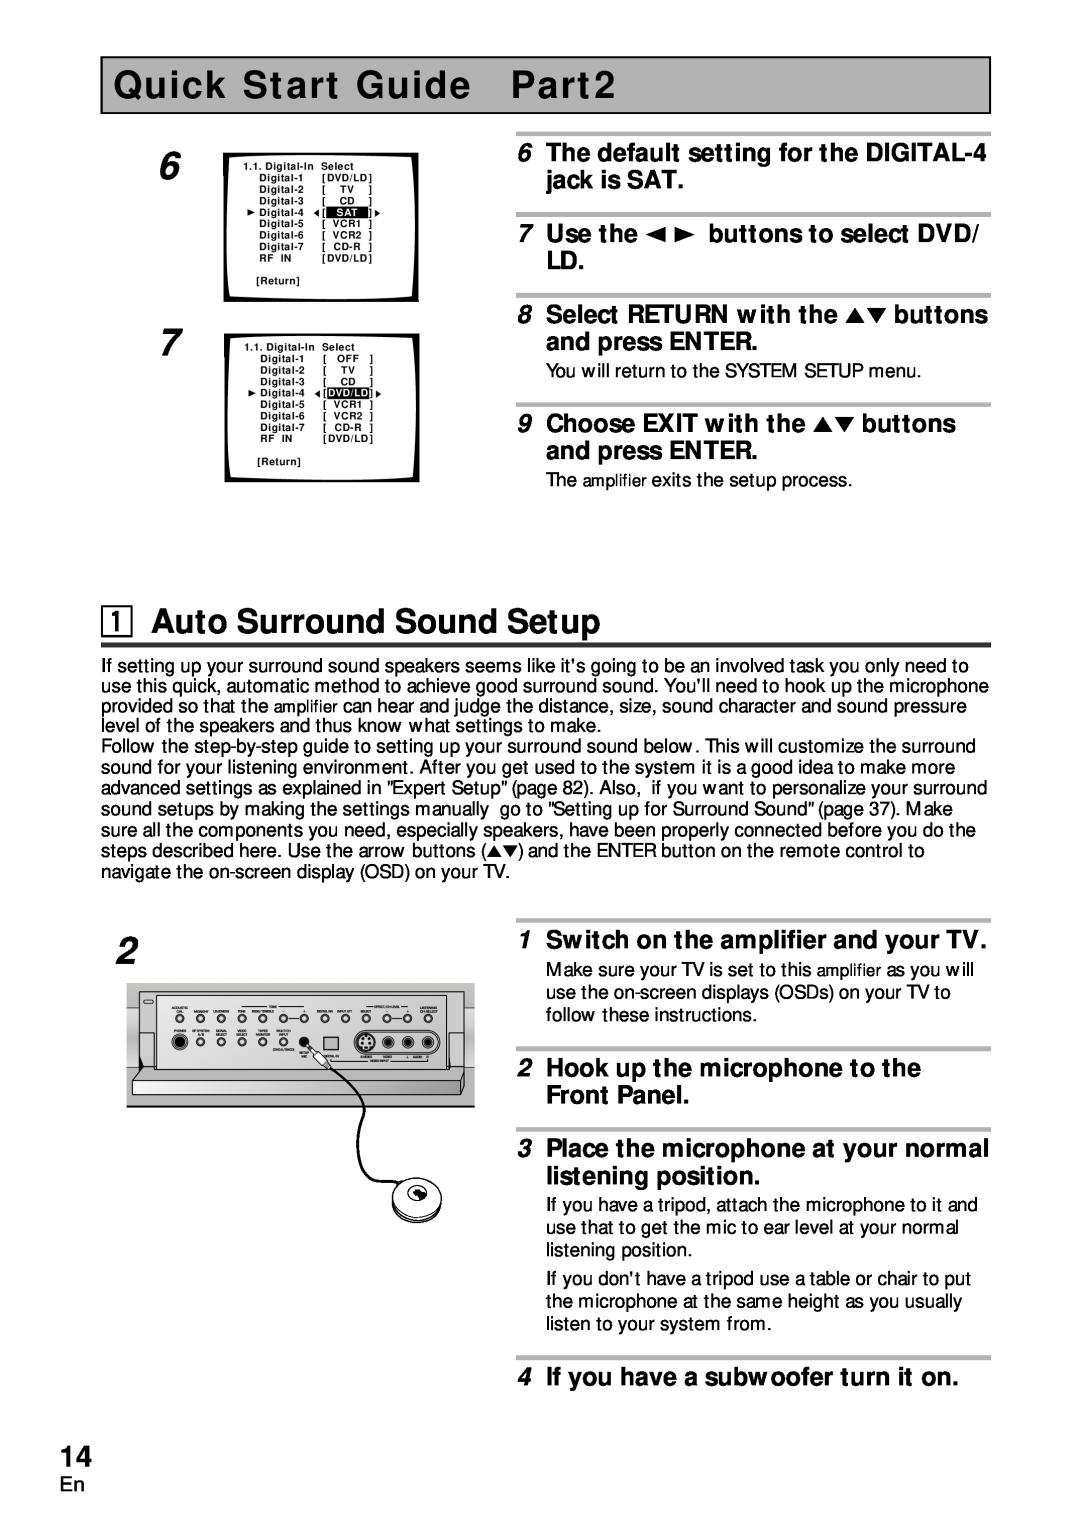 Pioneer VSA-AX10 Quick Start Guide Part2, 1Auto Surround Sound Setup, 6The default setting for the DIGITAL-4jack is SAT 